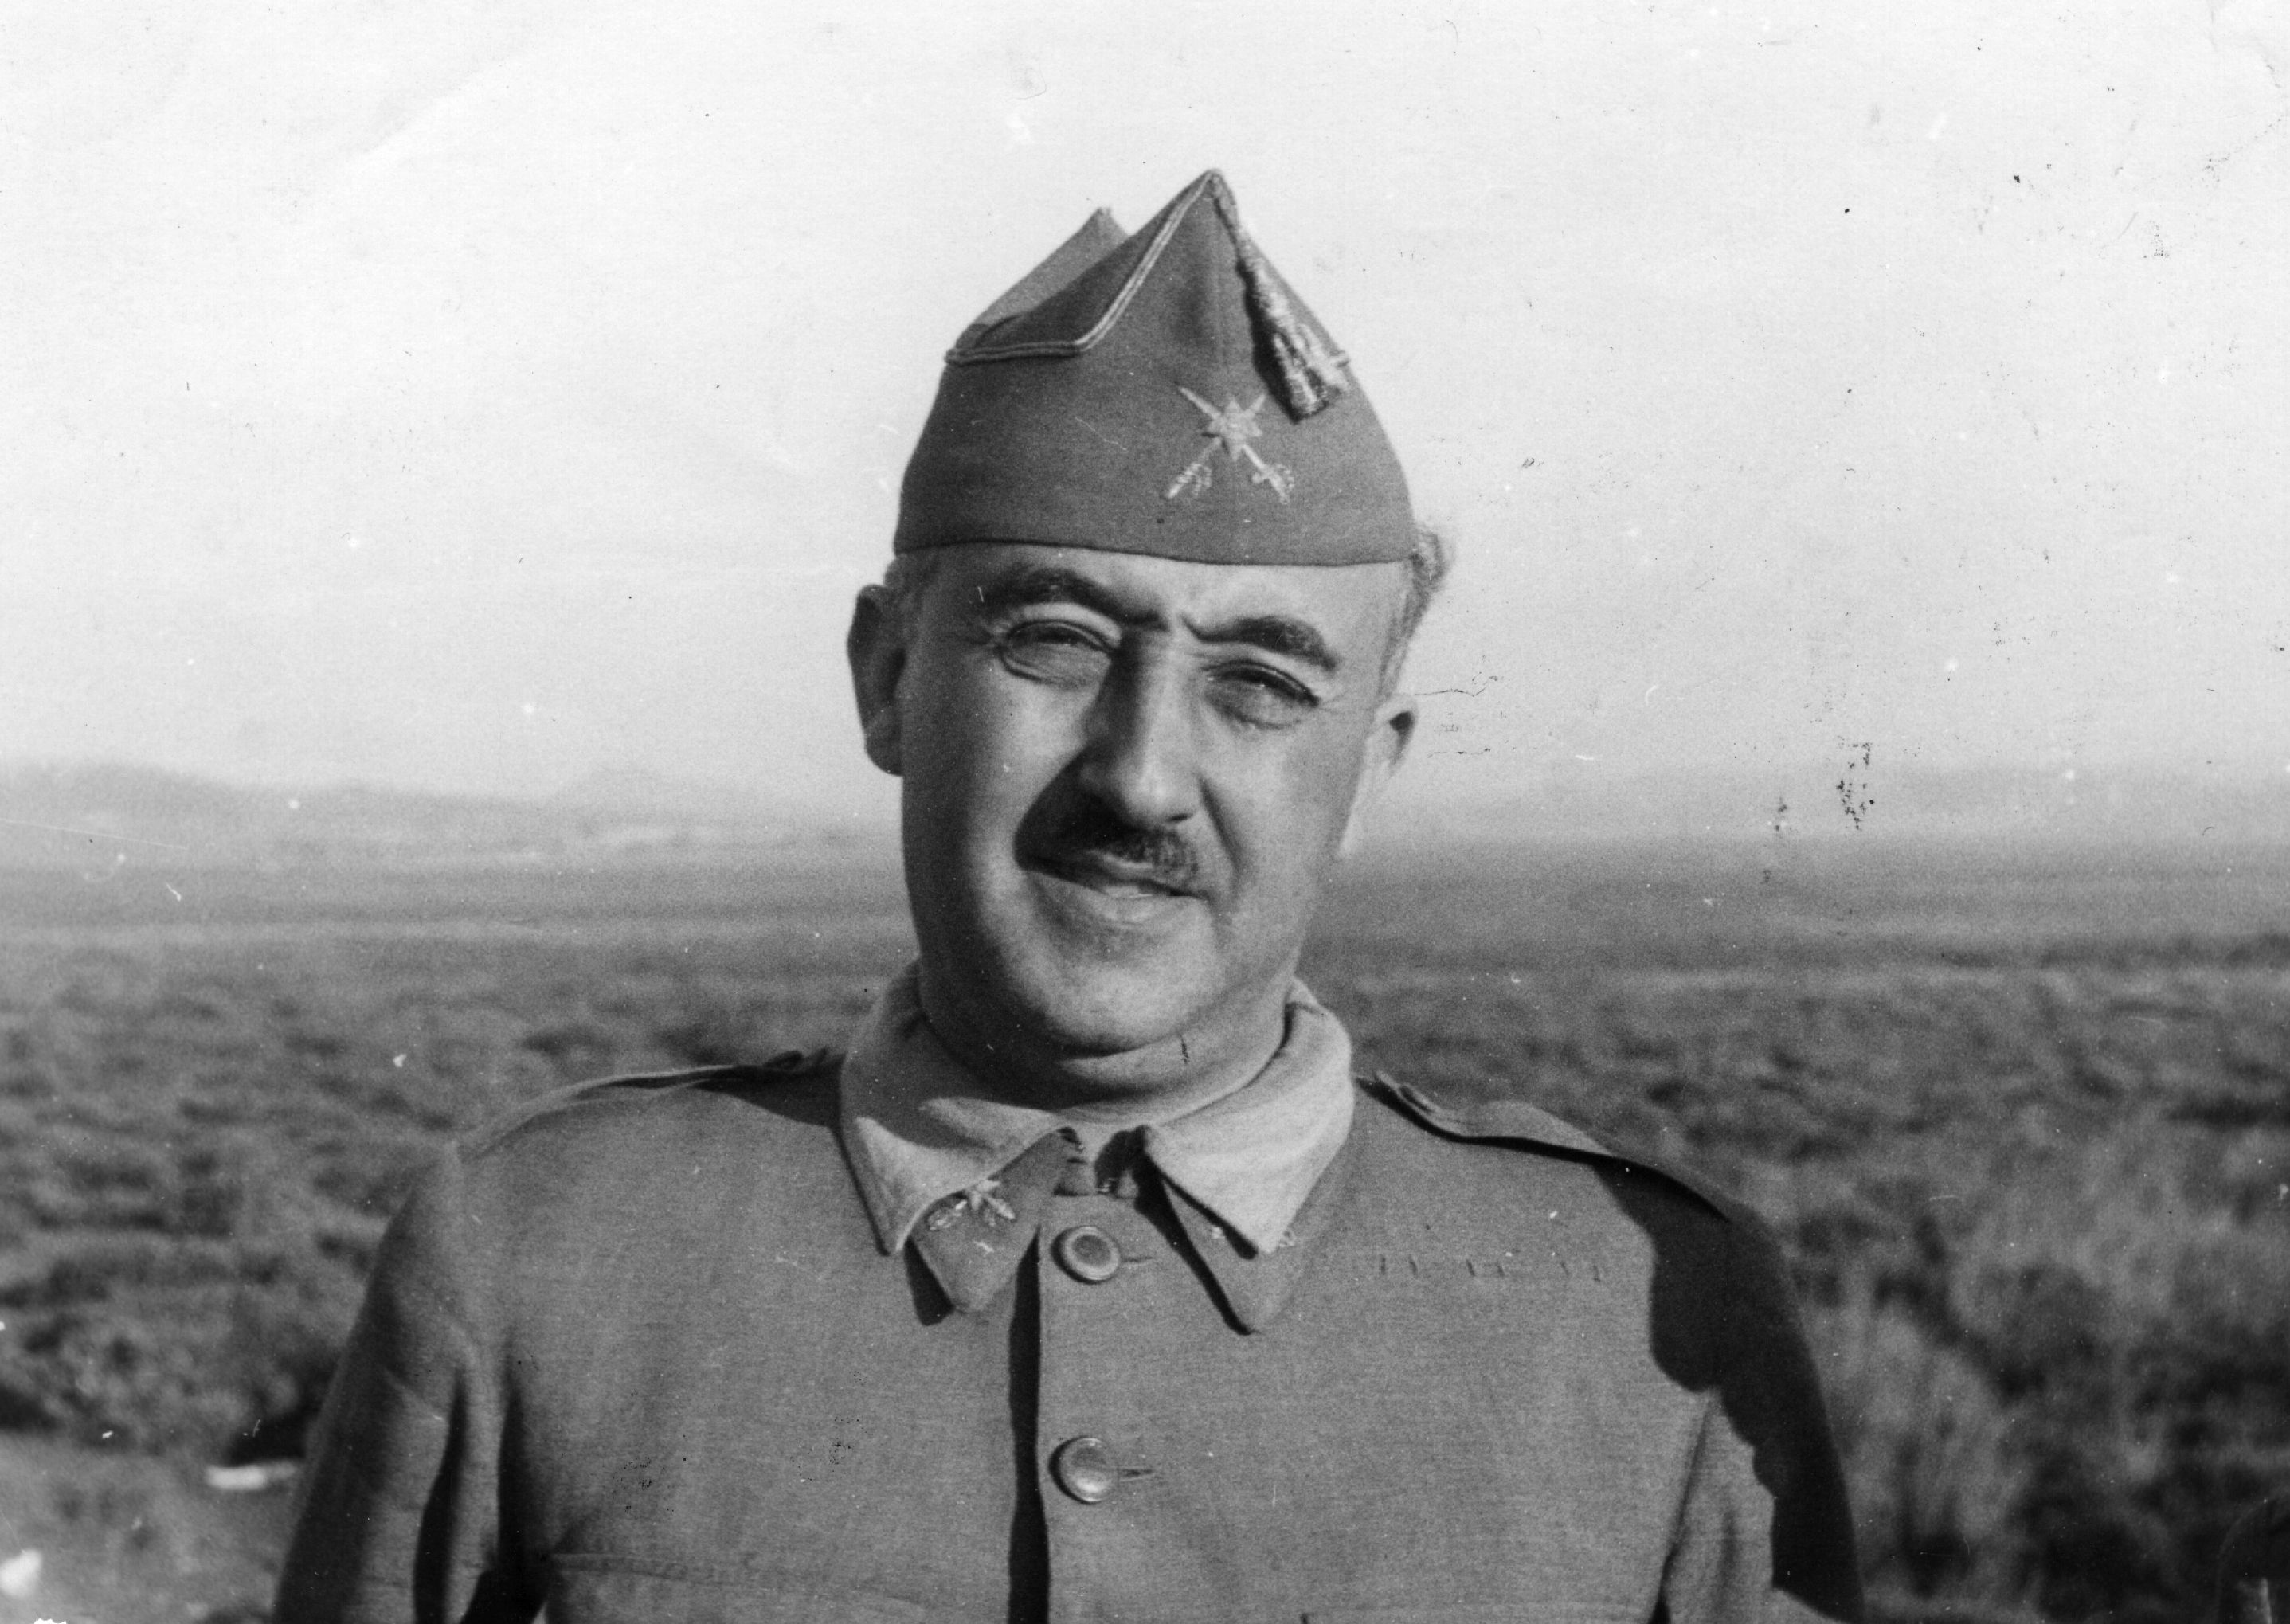 Generalissimo Francisco Franco wearing a hat